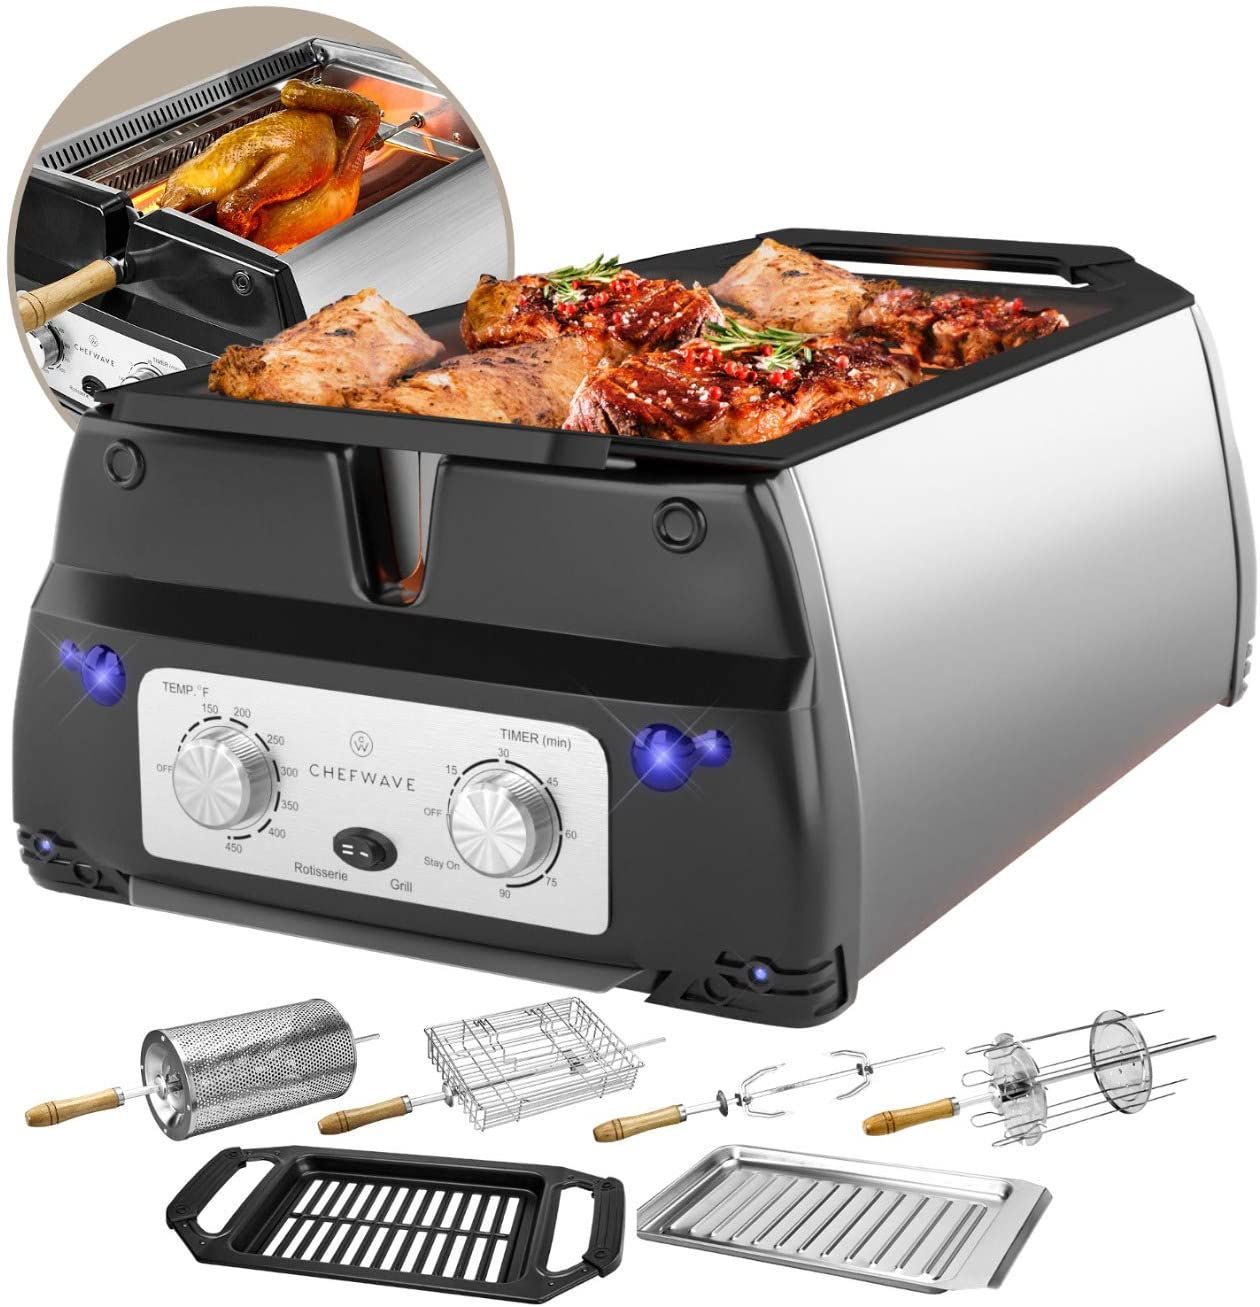 ChefWave Smokeless Indoor Electric Grill &amp; Rotisserie - $$title$$